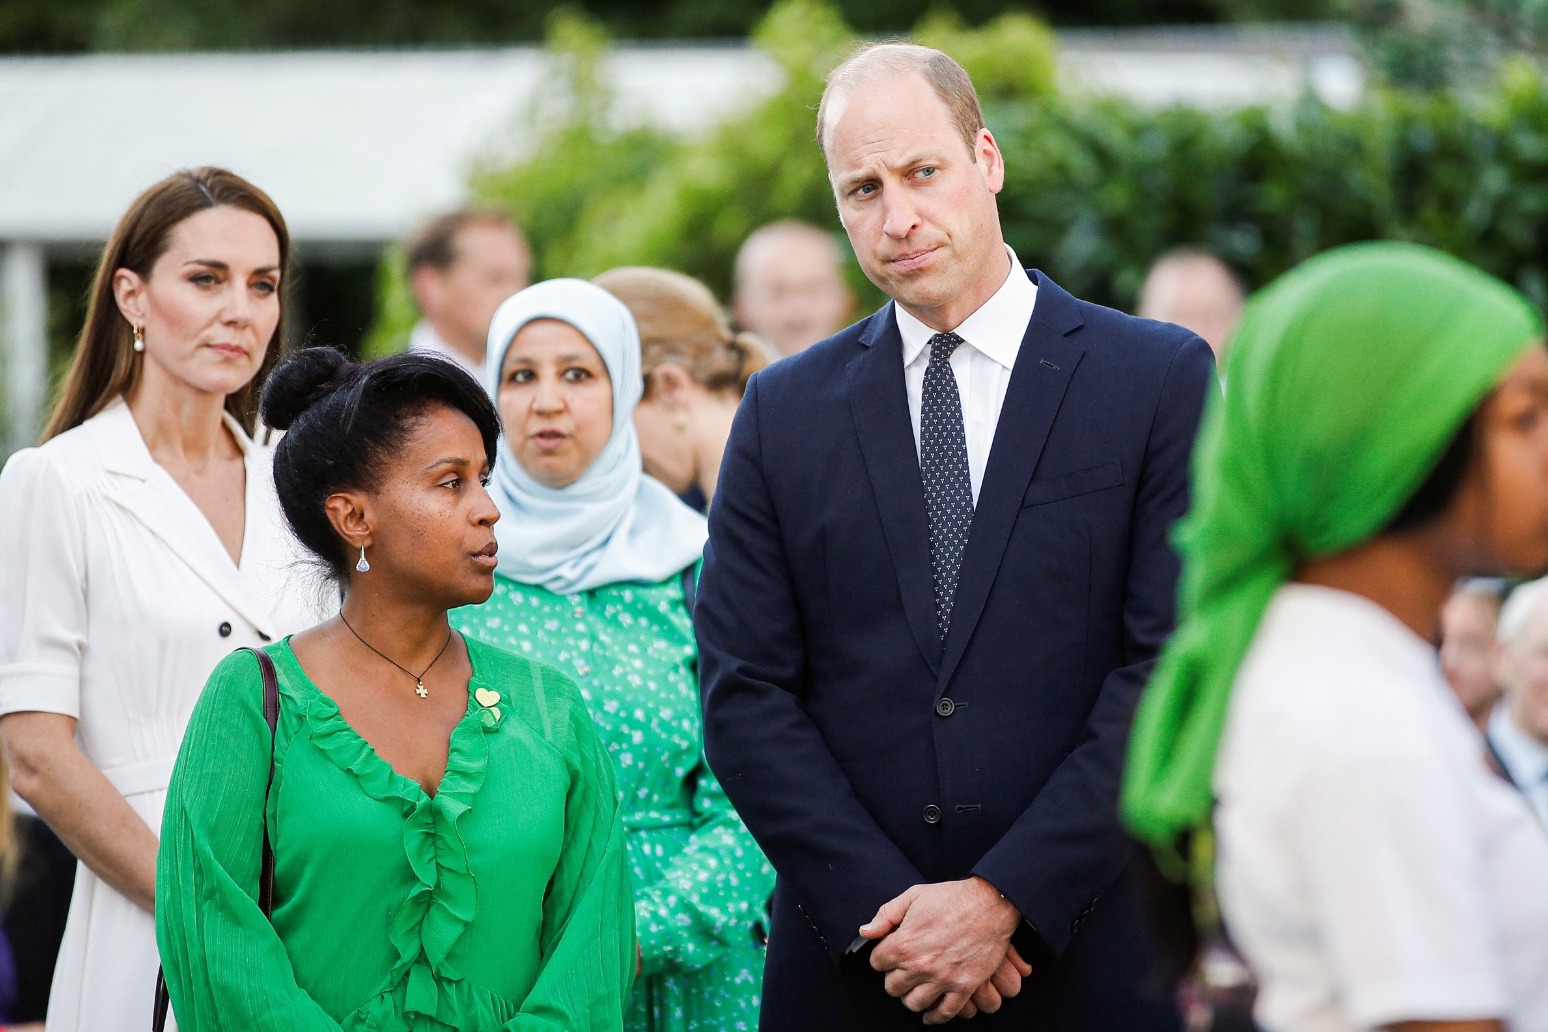 Senior royals and politicians join Grenfell community for fifth anniversary 